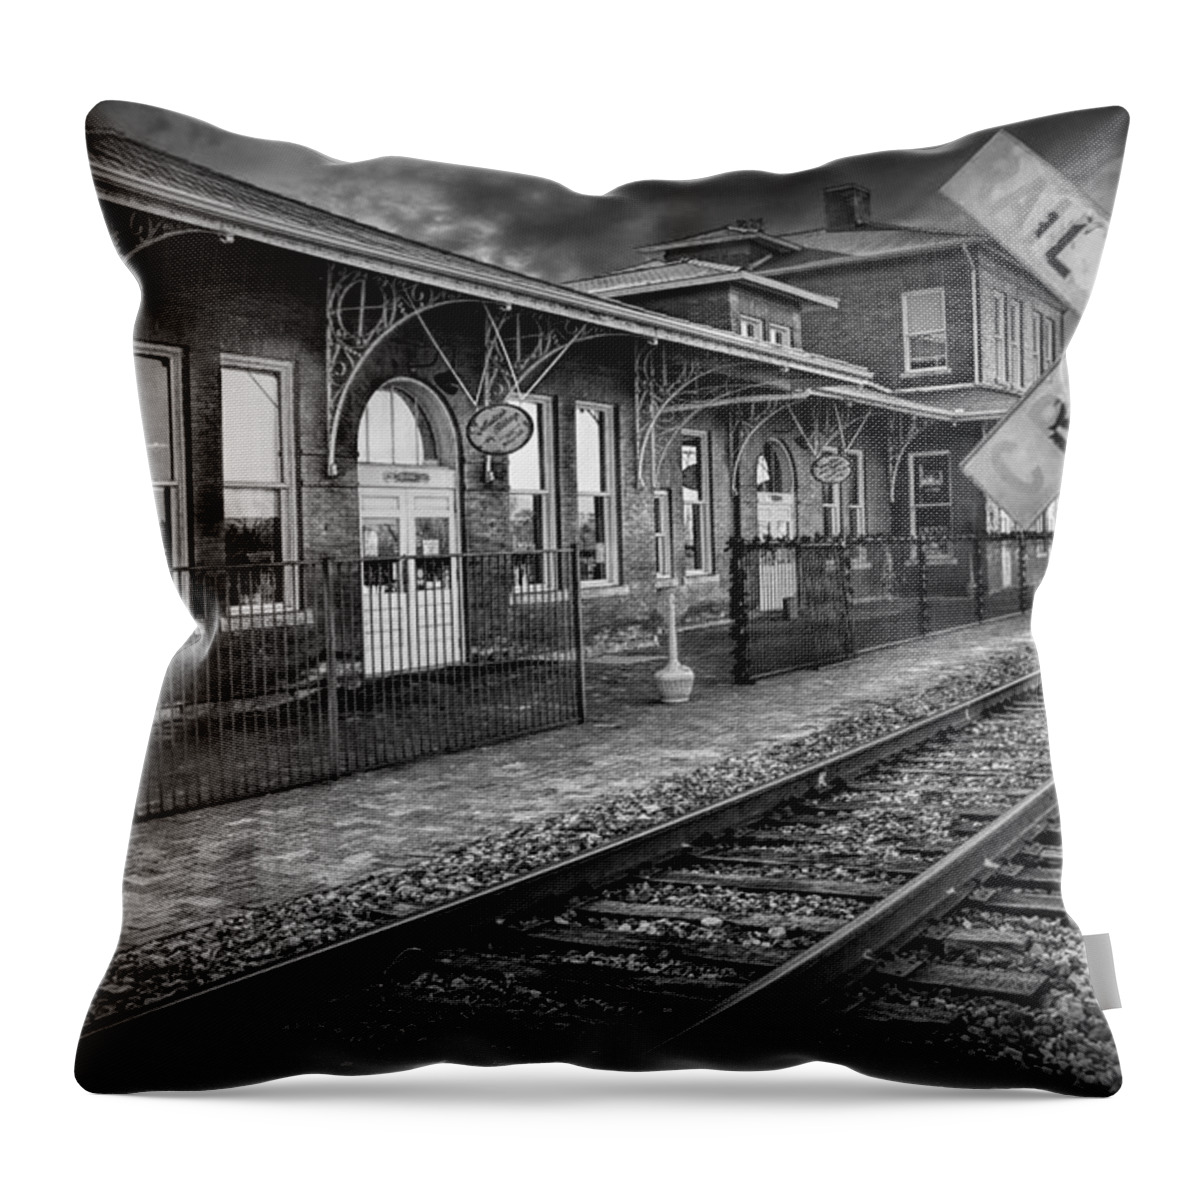 Station Throw Pillow featuring the photograph Old Train Station with Crossing Sign in Black and White by Randall Nyhof